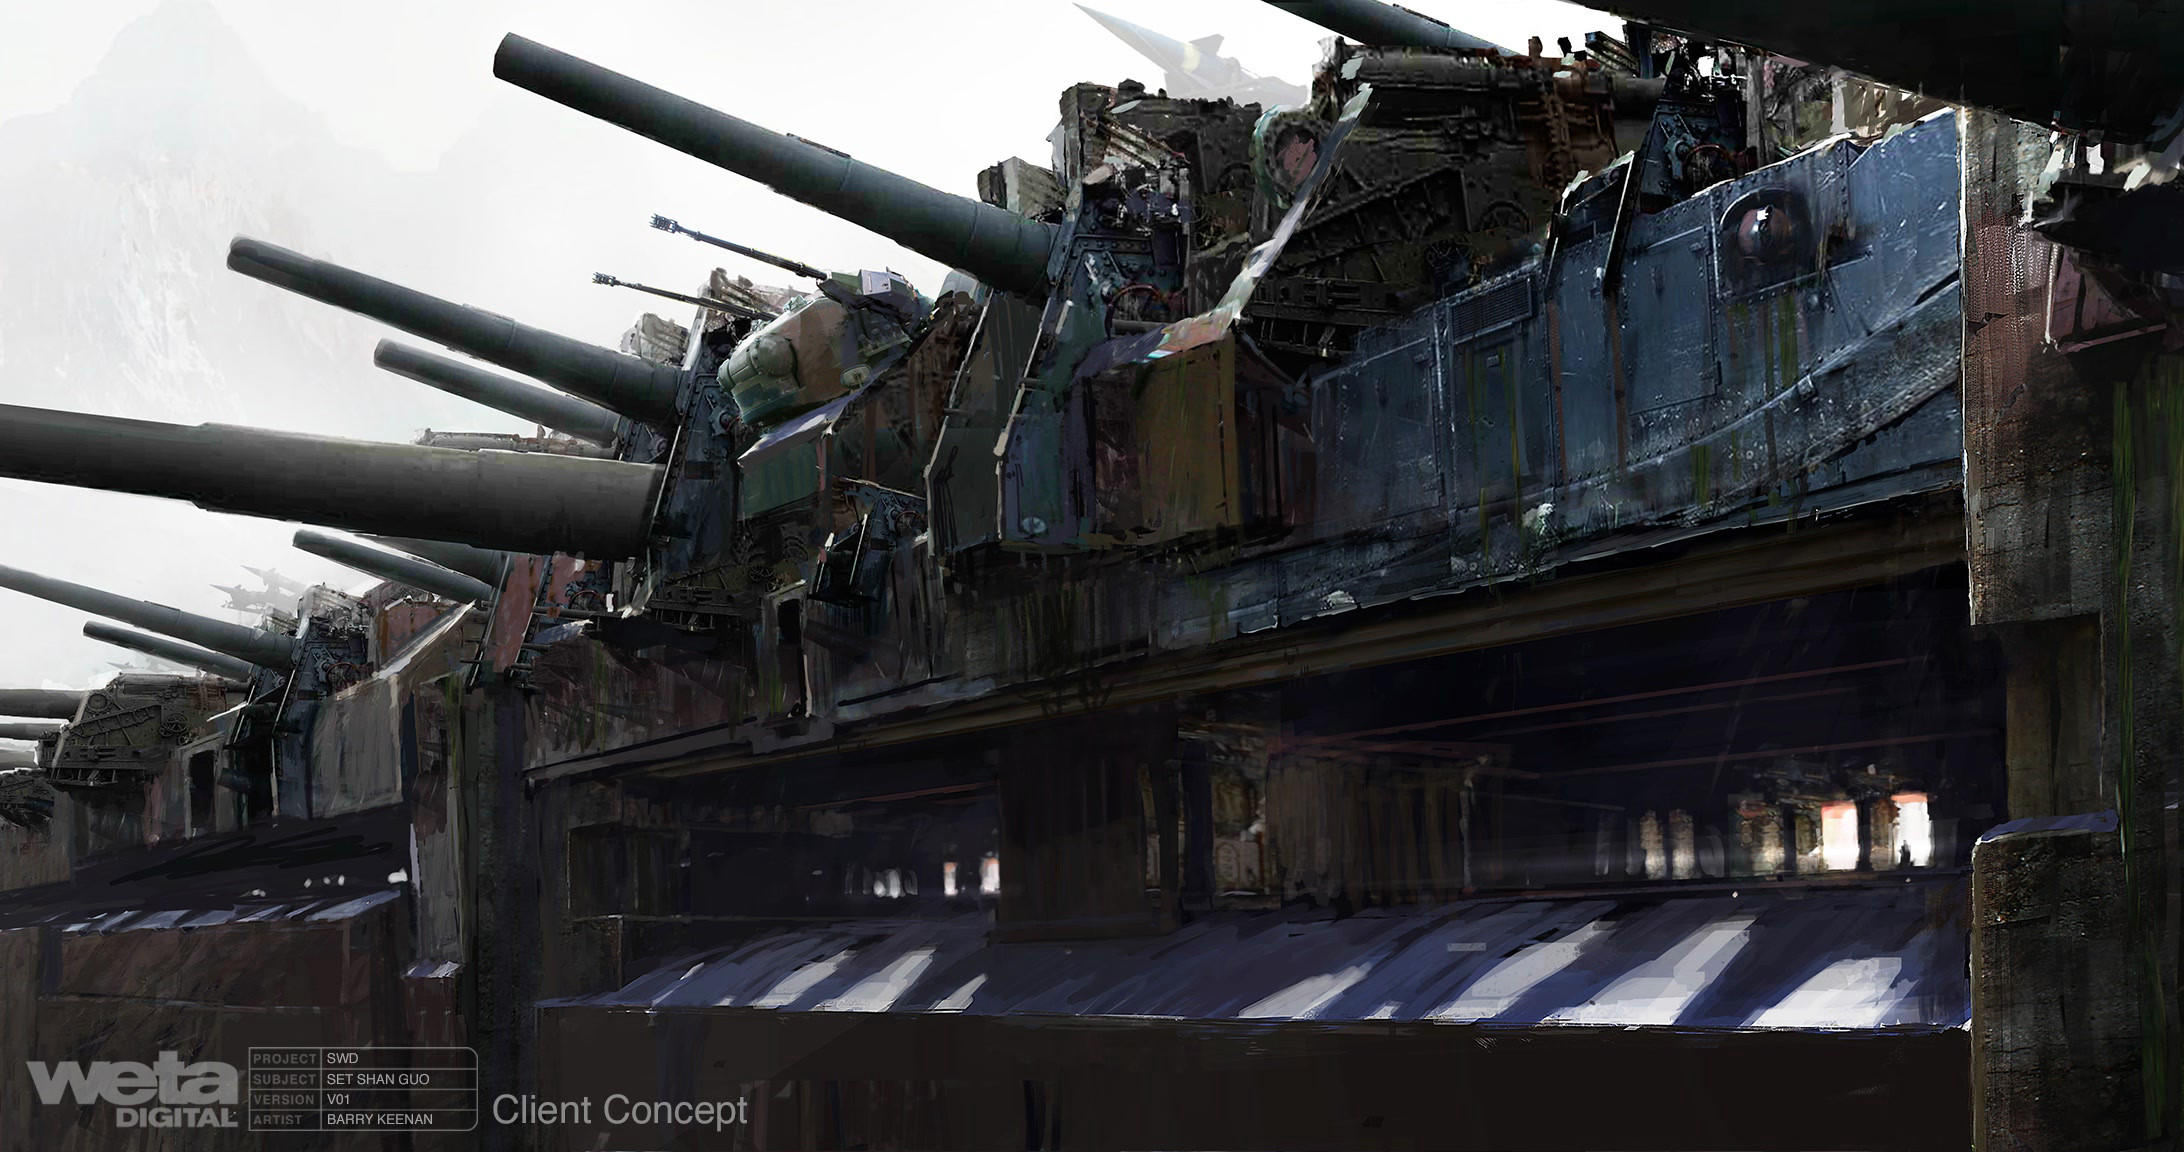 Pre-production concept painting by Nick Keller.